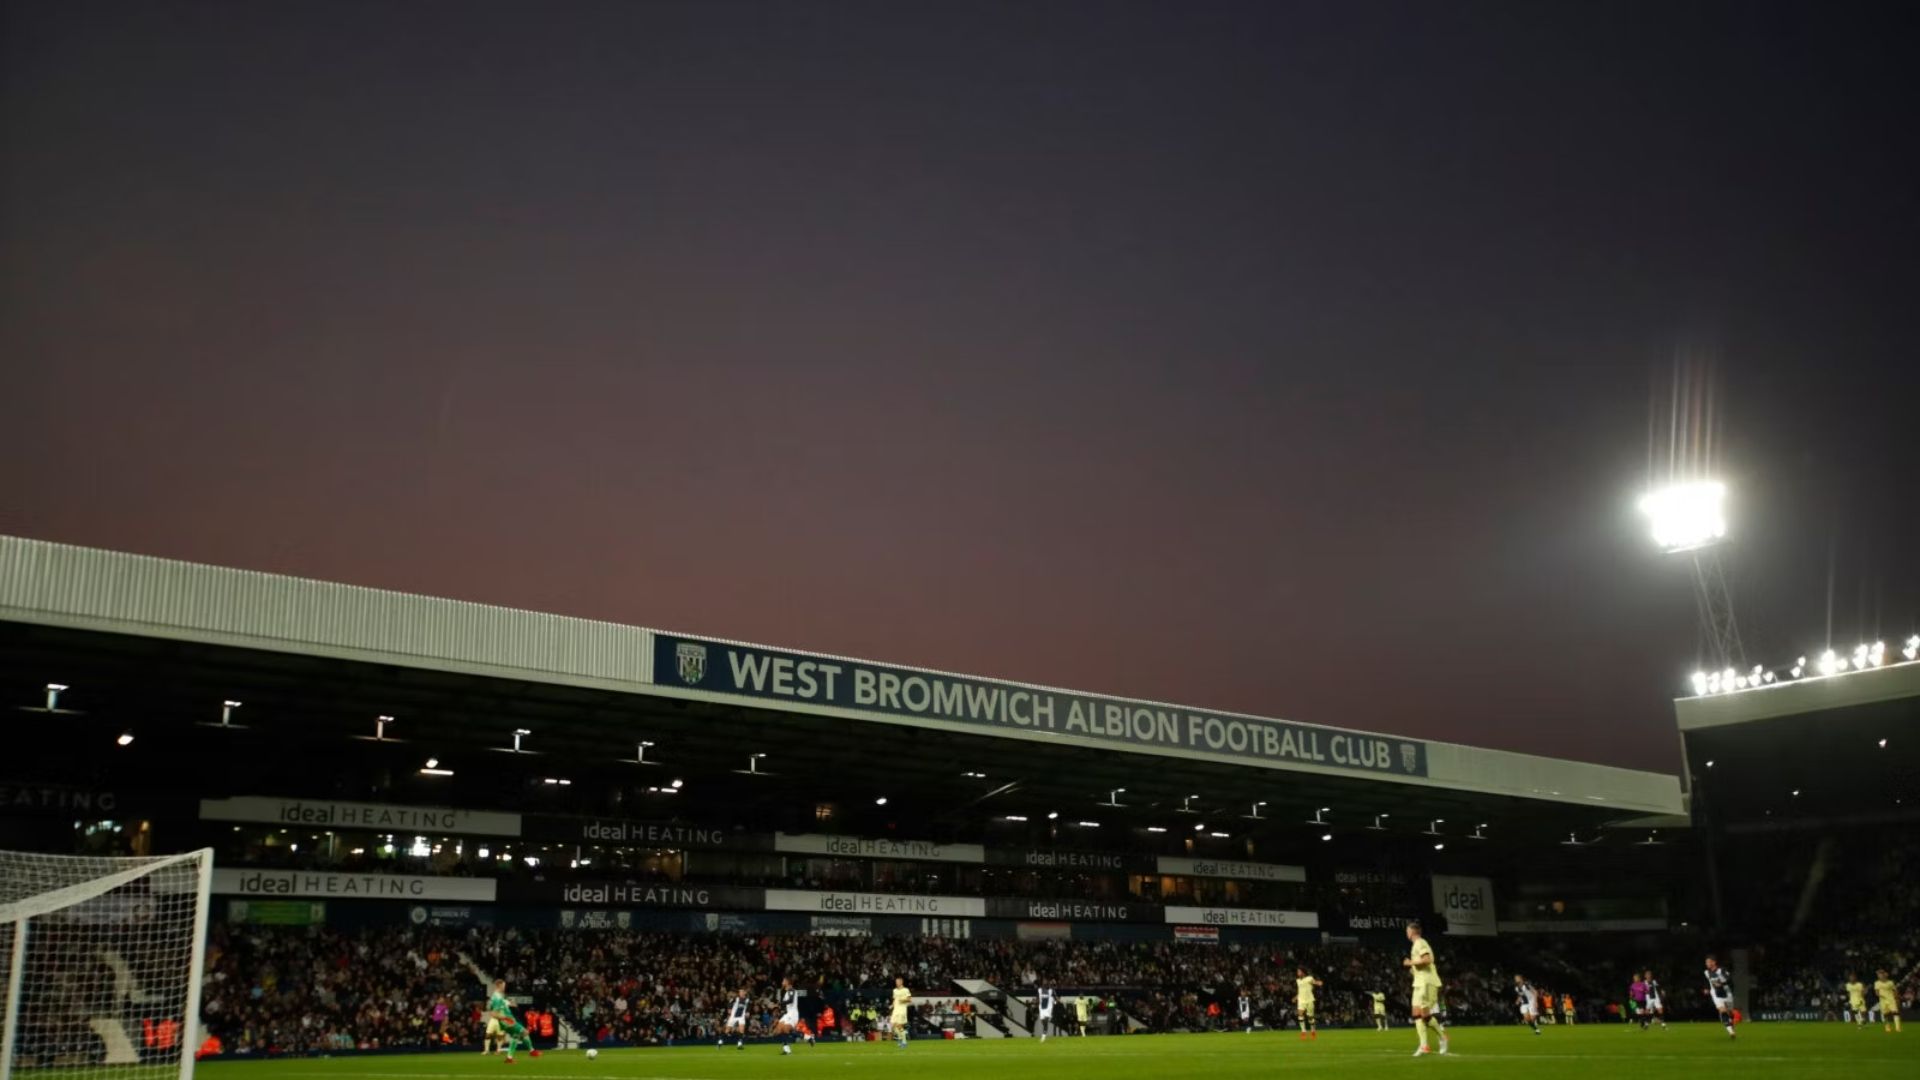 West Bromwich Albion Football Club - The Hawthorns - Stadium in